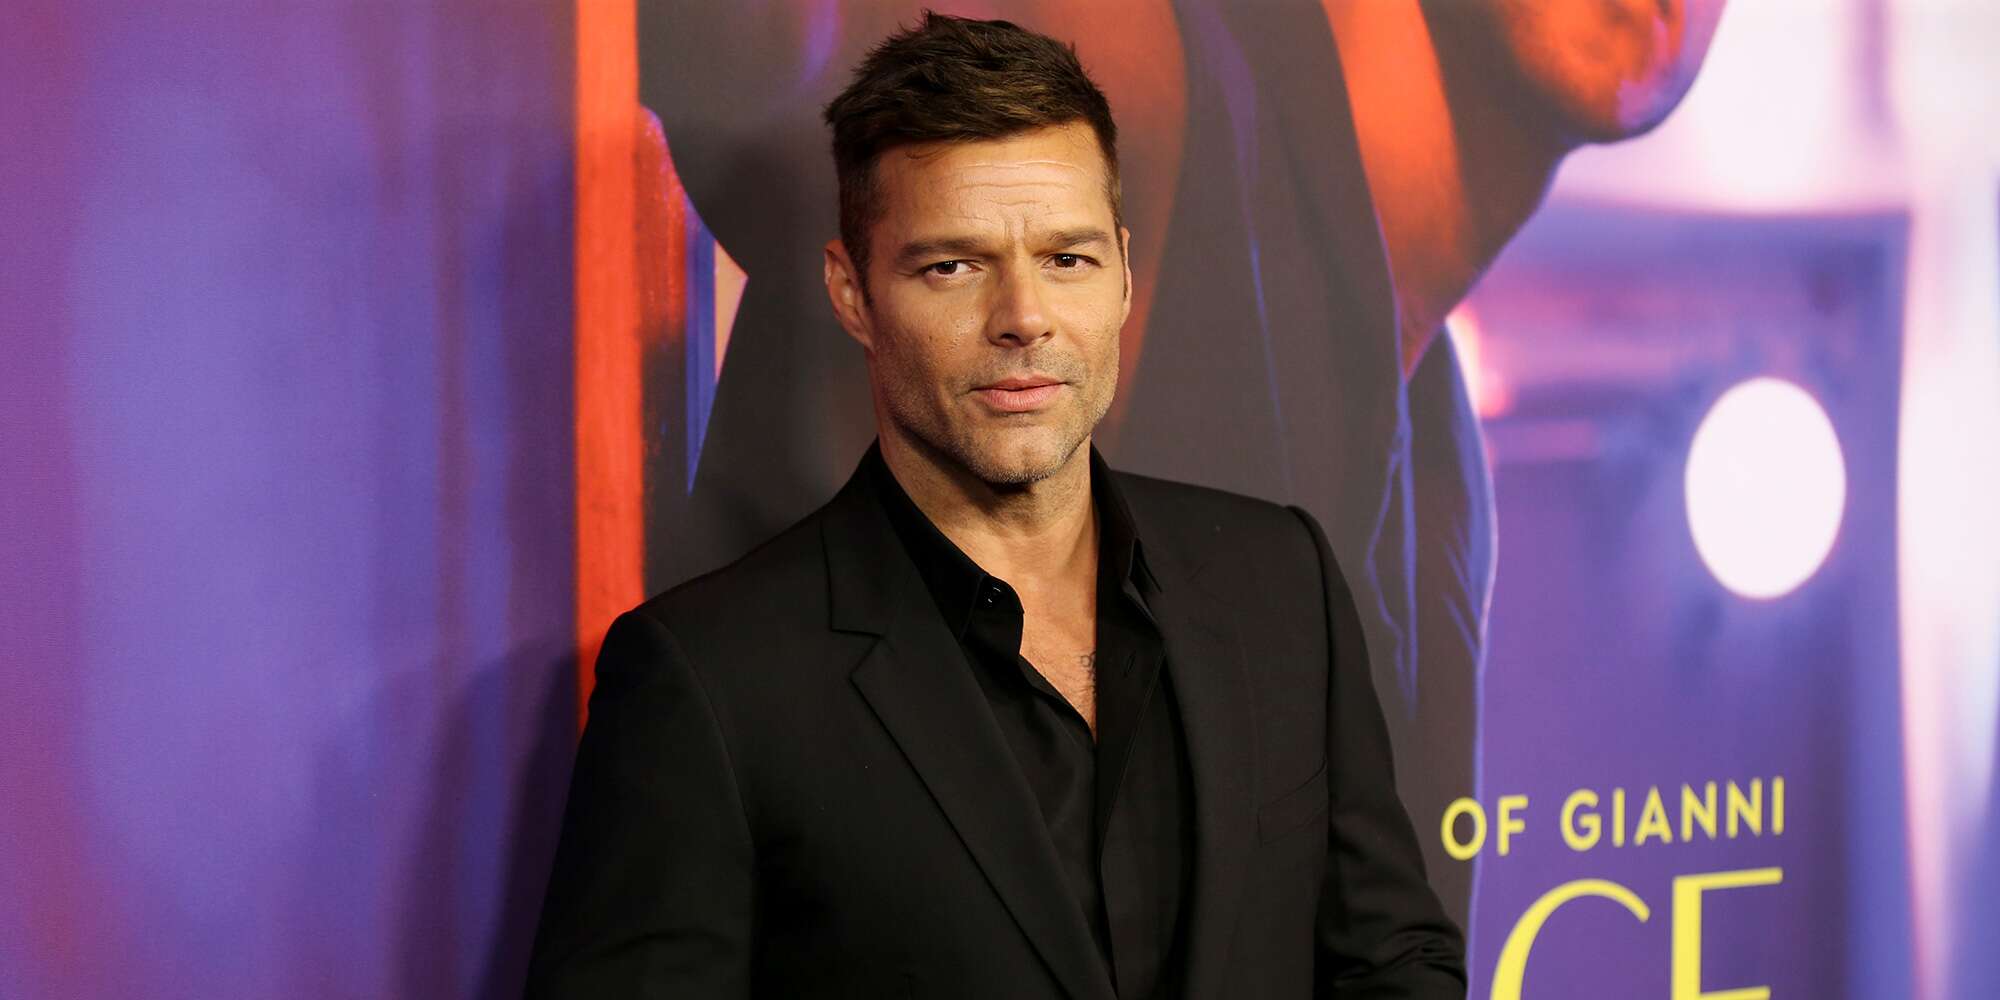 You are currently viewing Ricky Martin denies incest allegations, attorney calls claims ‘untrue’ and ‘disgusting’